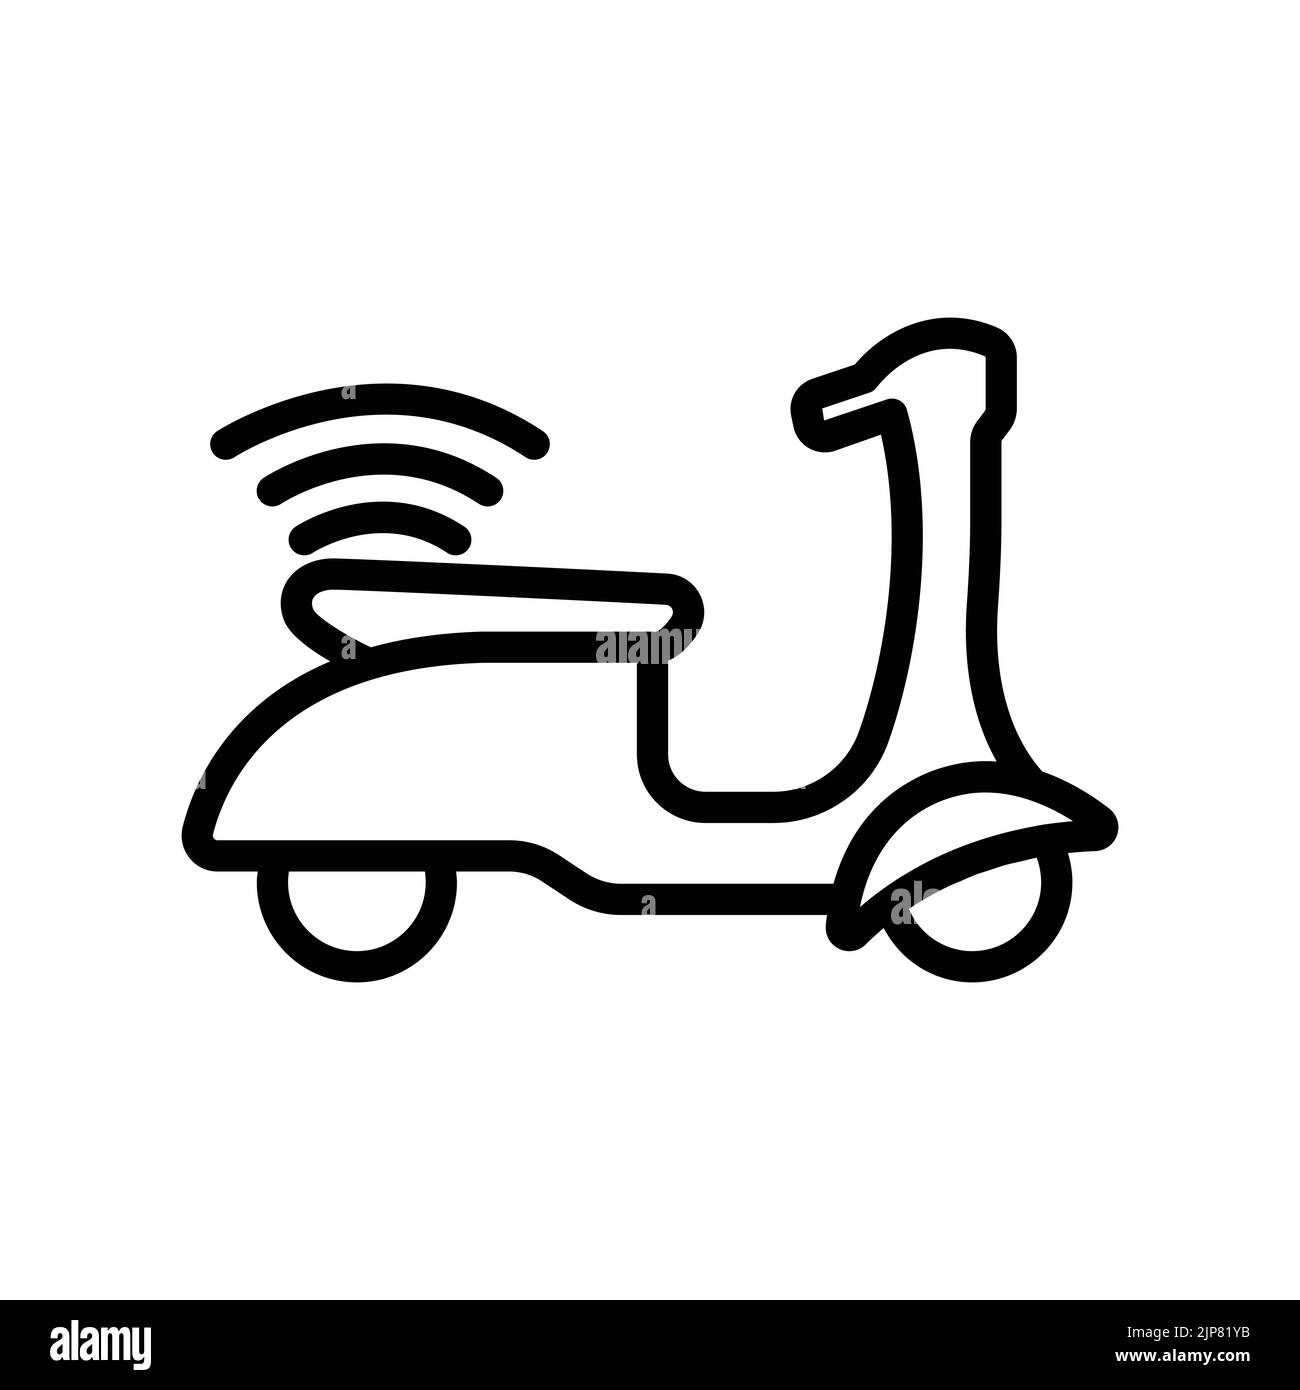 Scooter icon with signal. icon related to technology. smart device. transport device. line icon style. Simple design editable Stock Vector